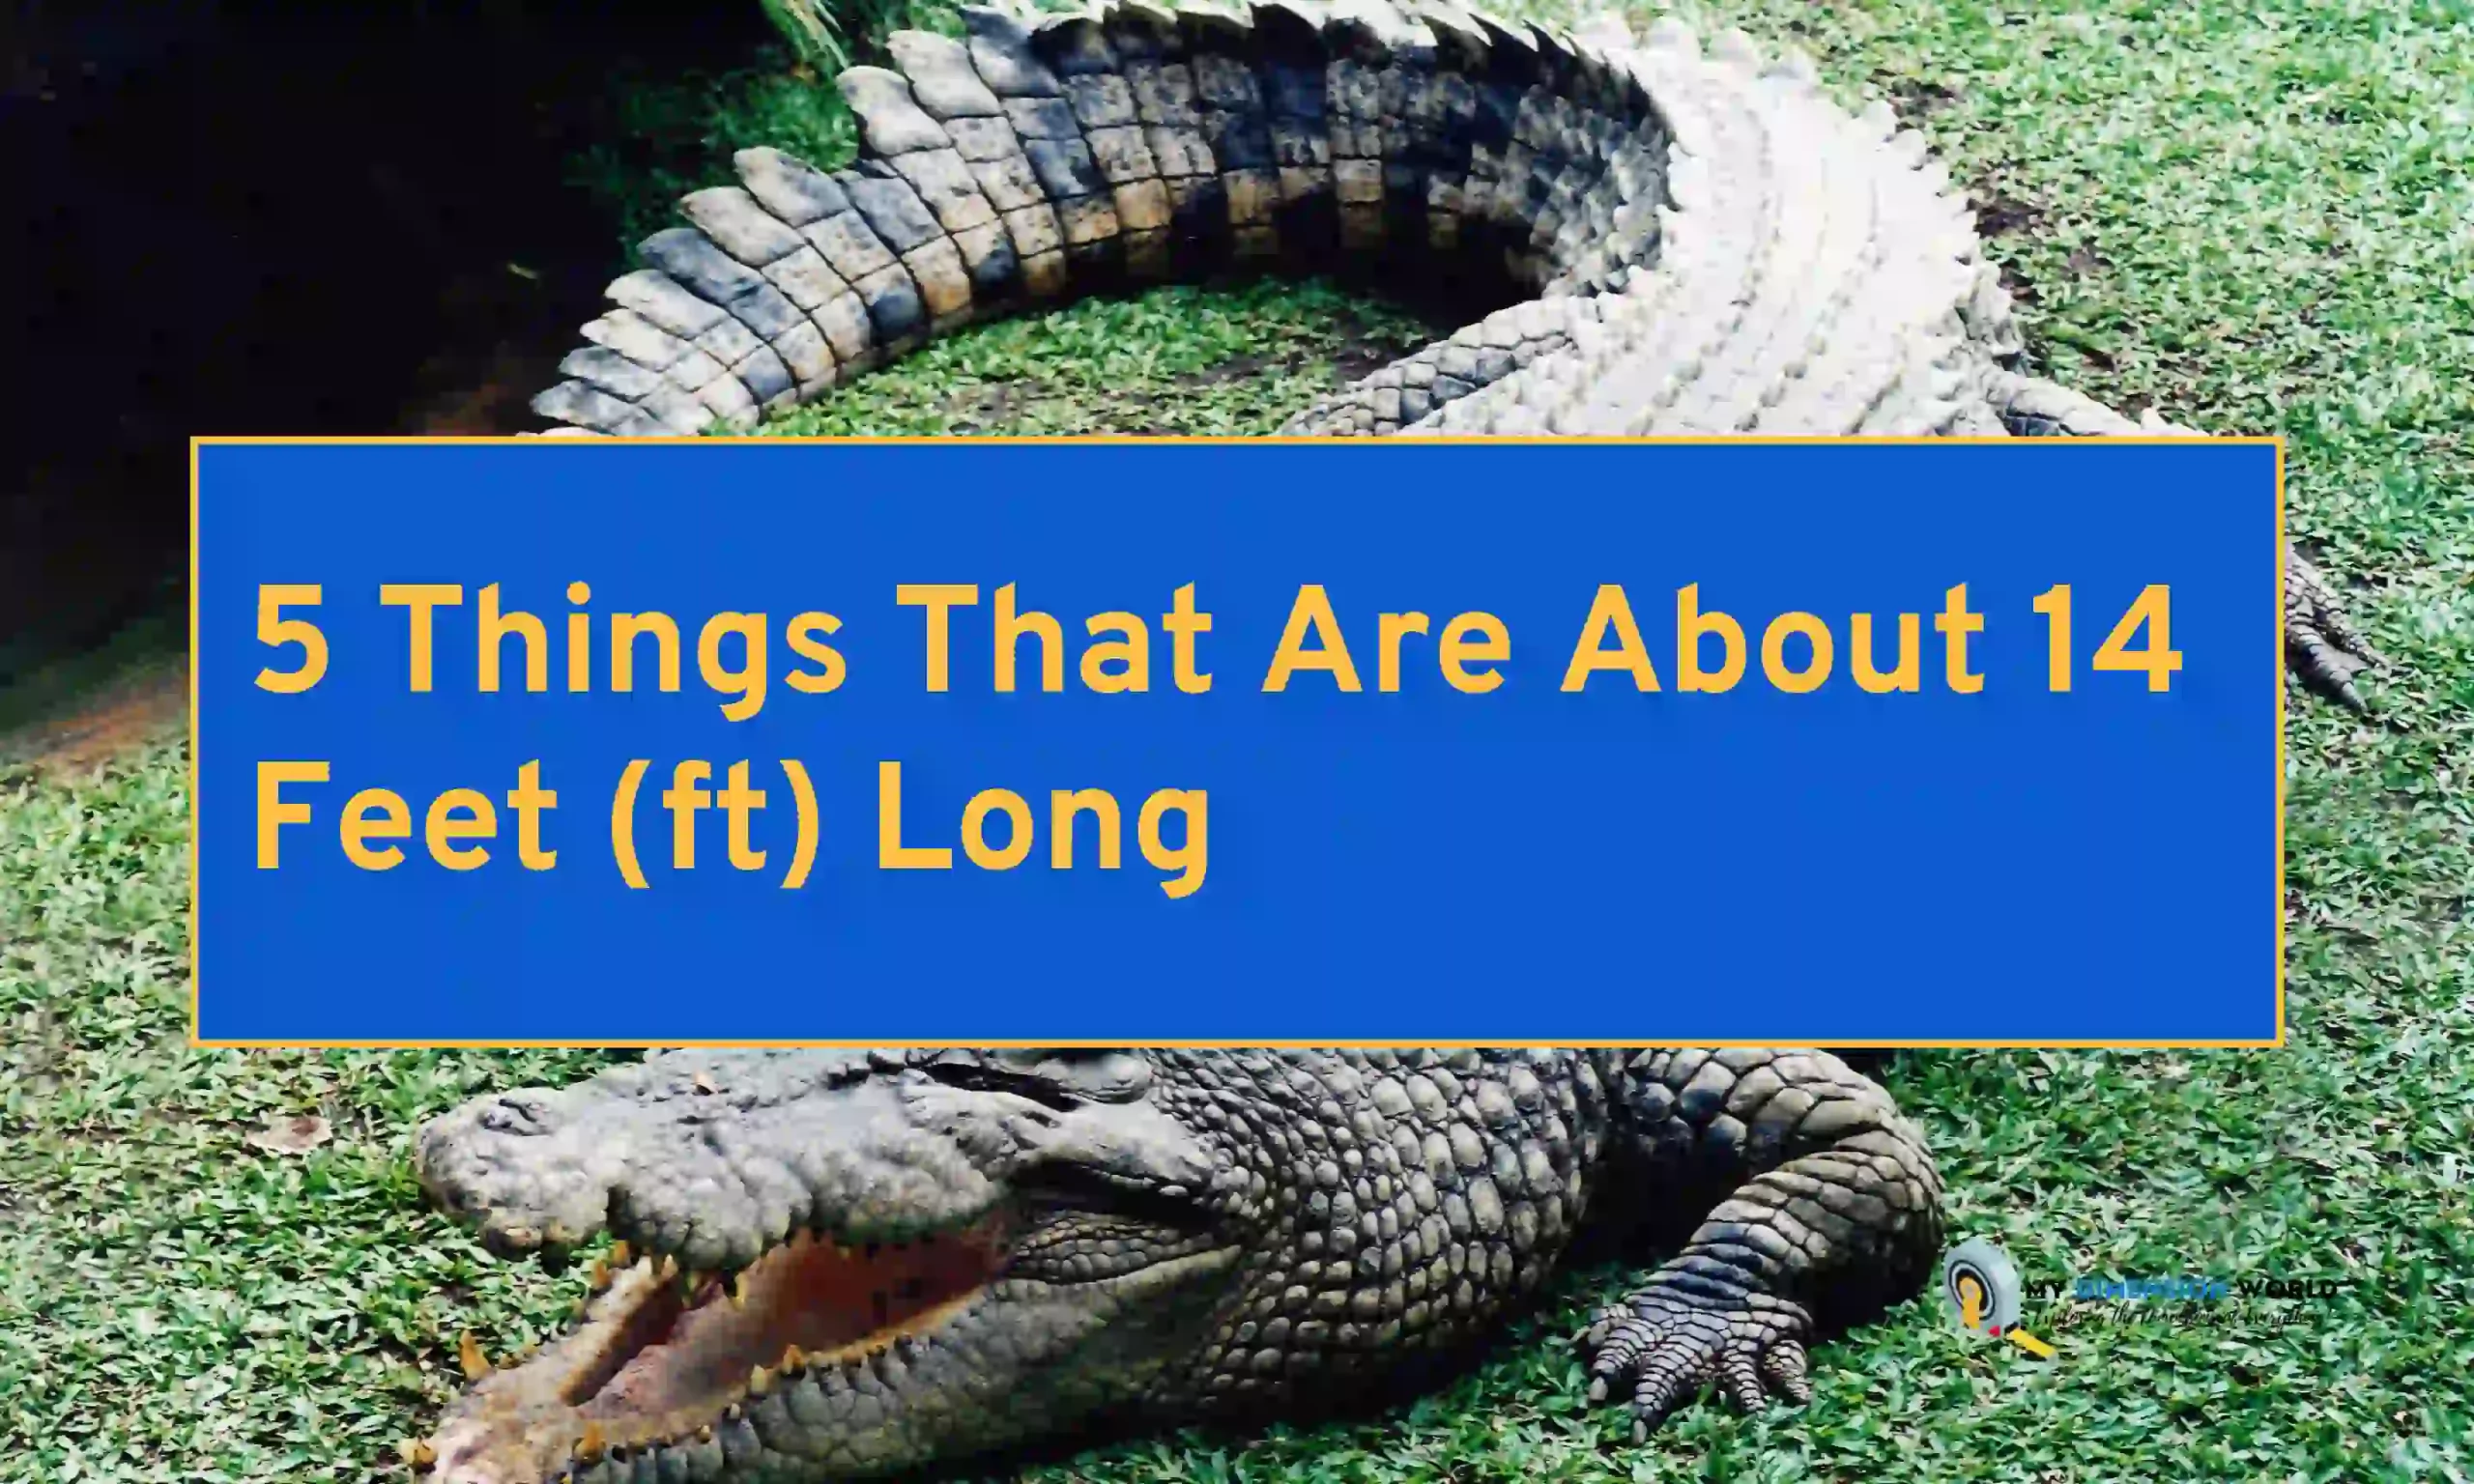 5 Things That Are About 14 Feet (ft) Long